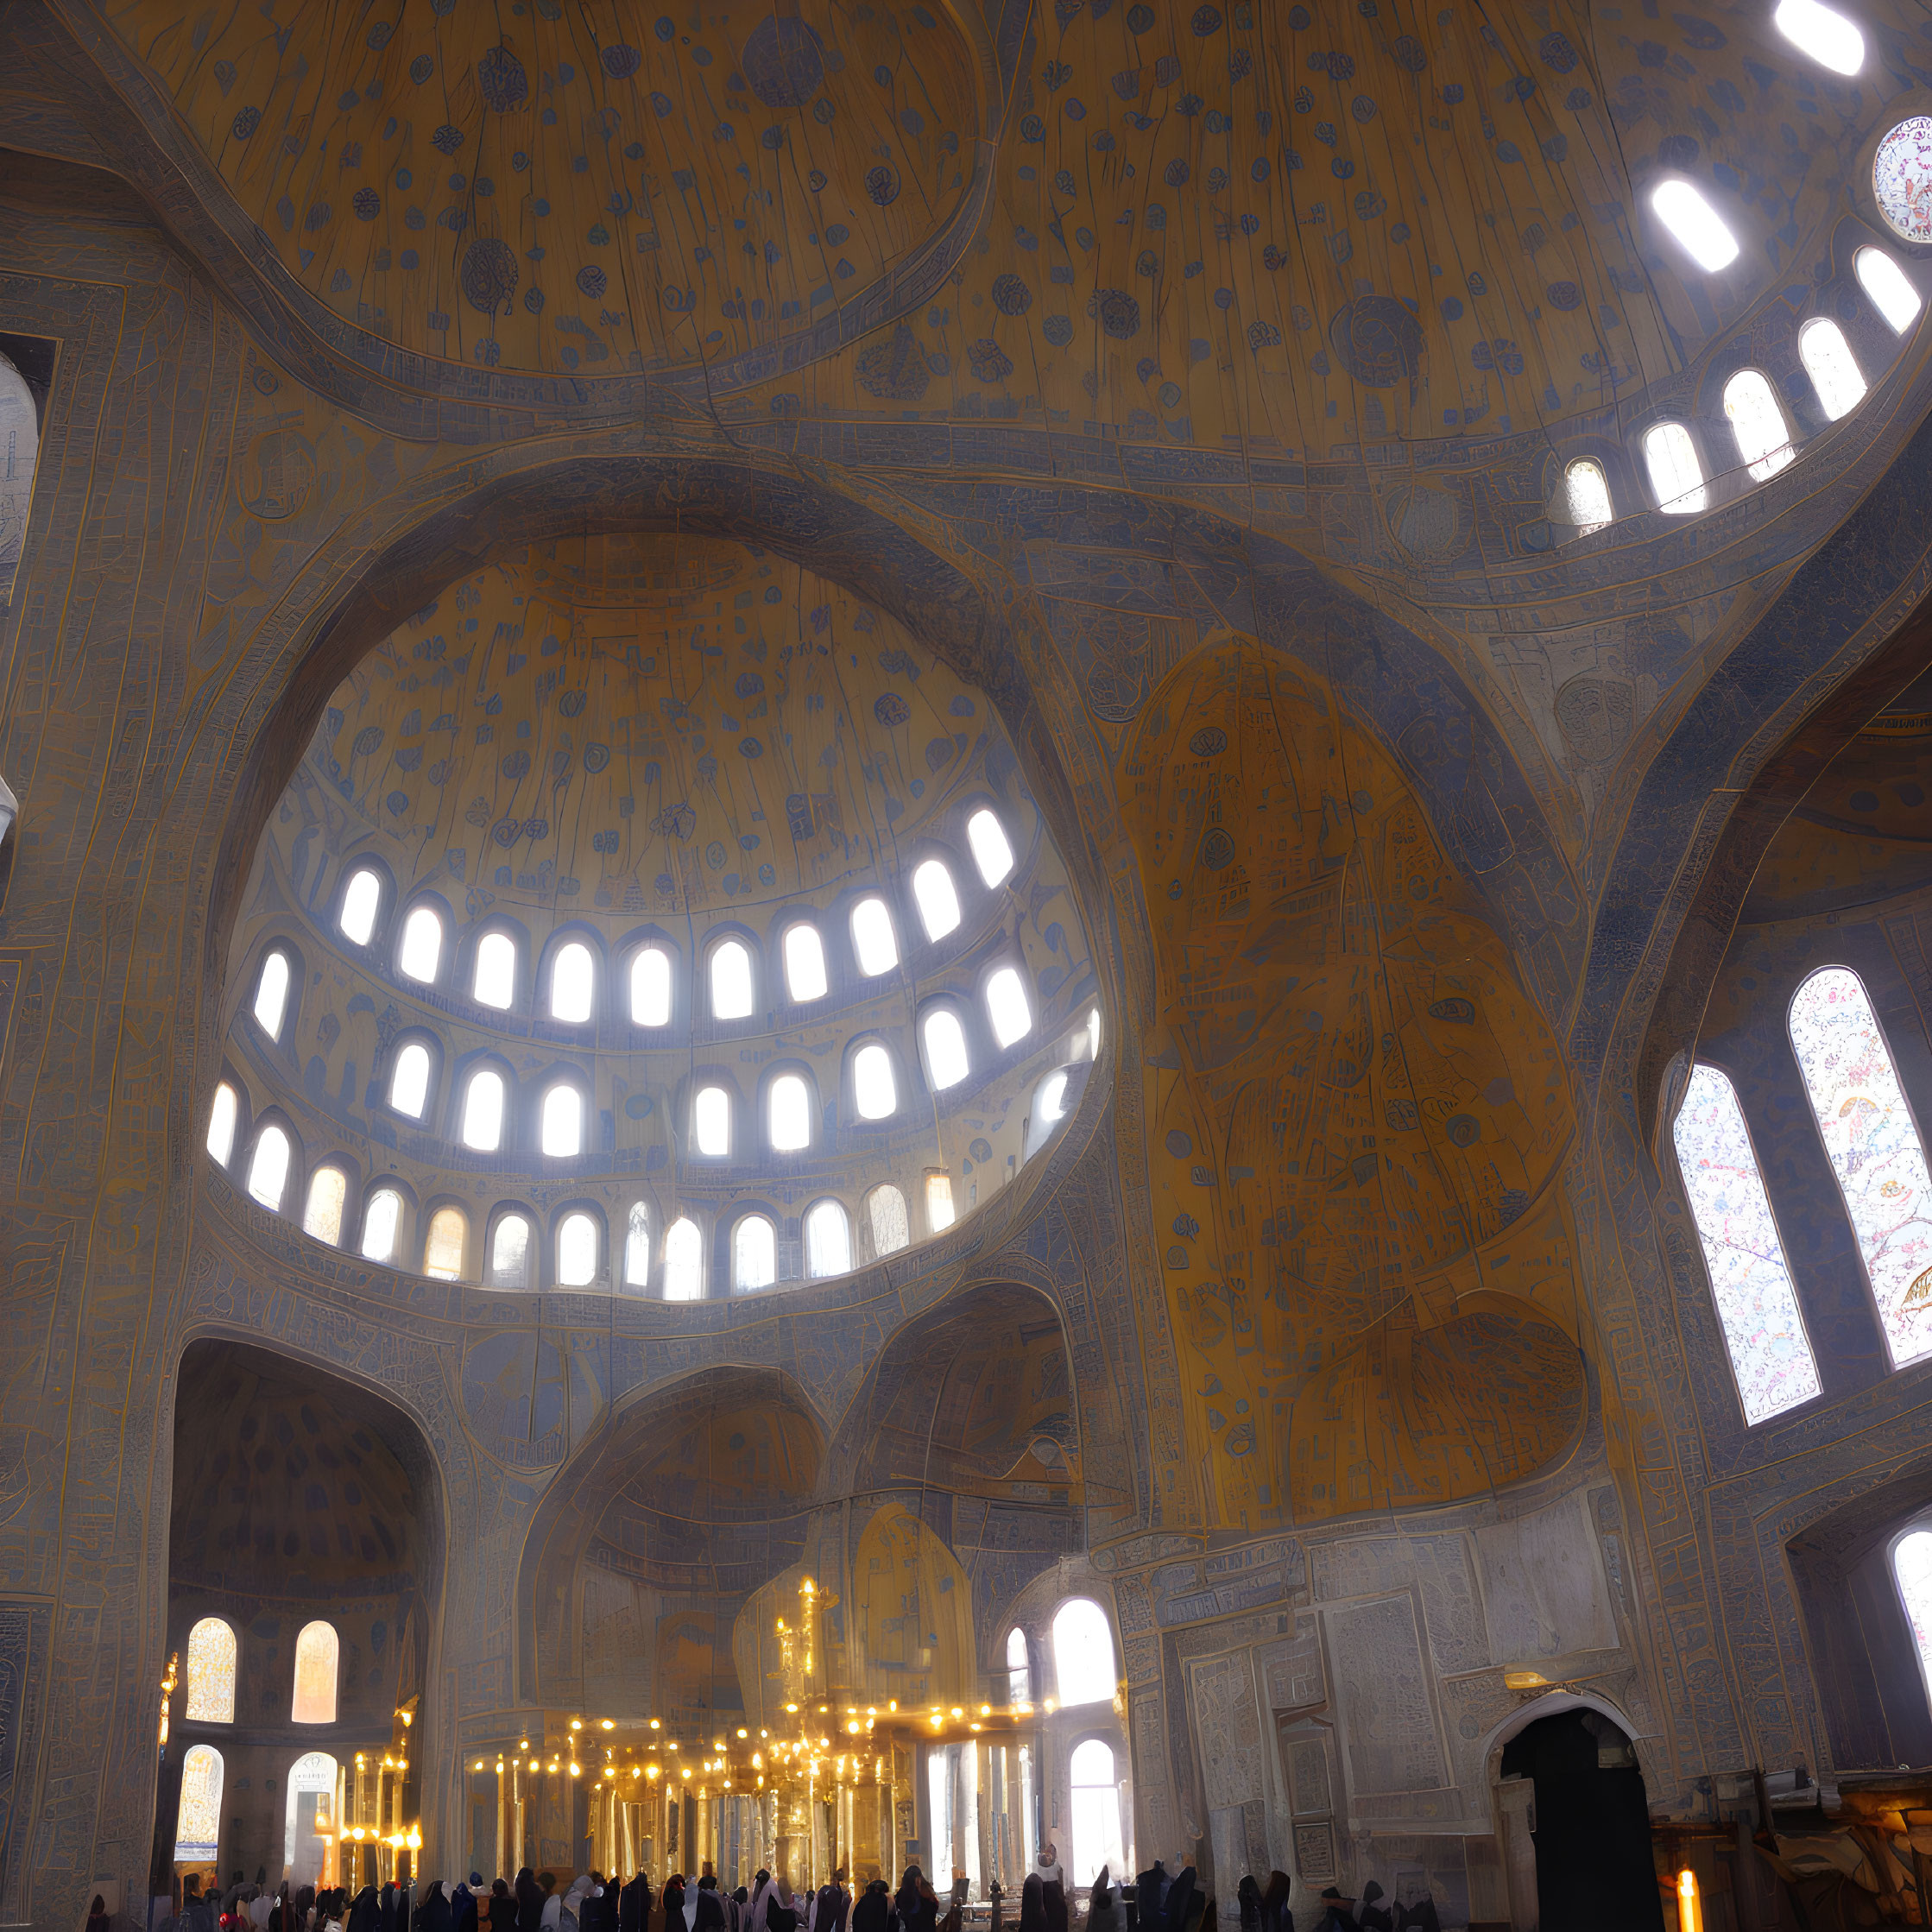 Ornate dome, intricate wall designs, visitors in grand mosque